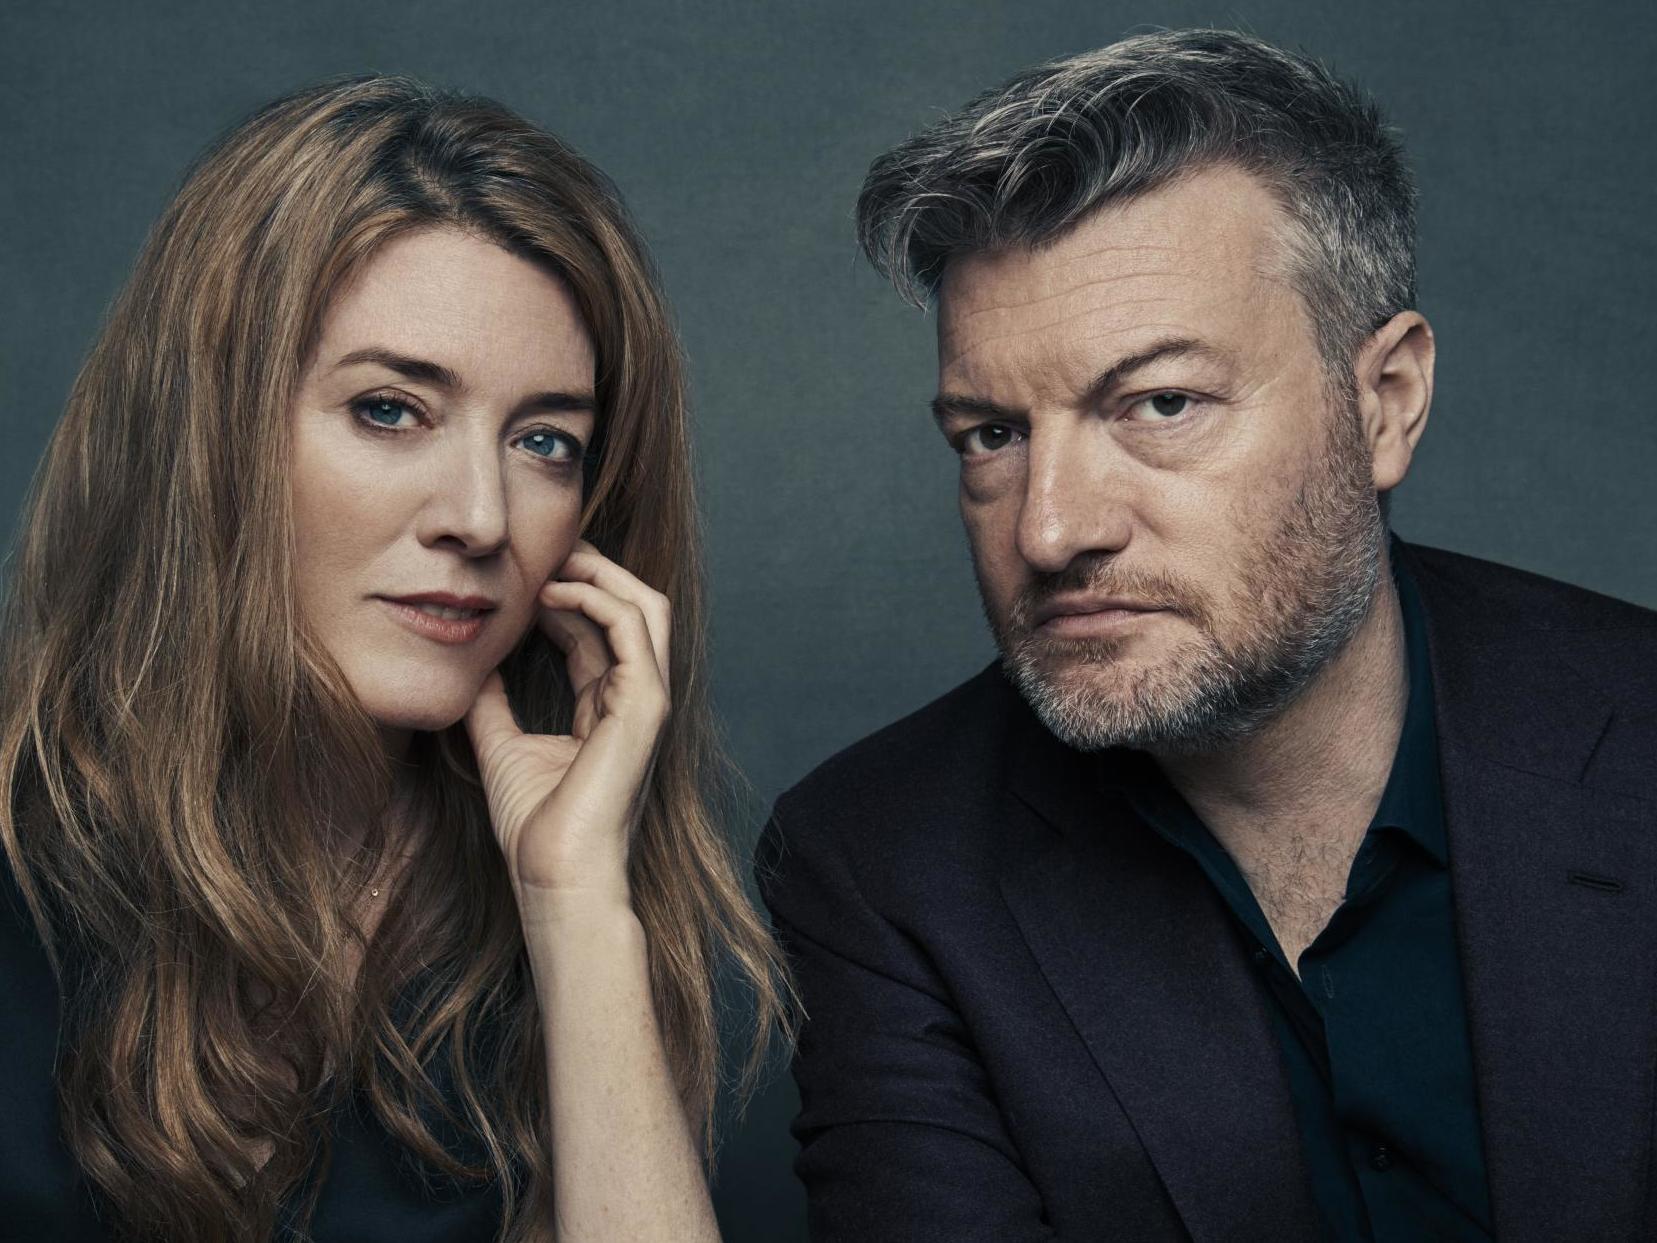 Black Mirror producers Annabel Jones and Charlie Brooker: 'I think we're quite optimistic'